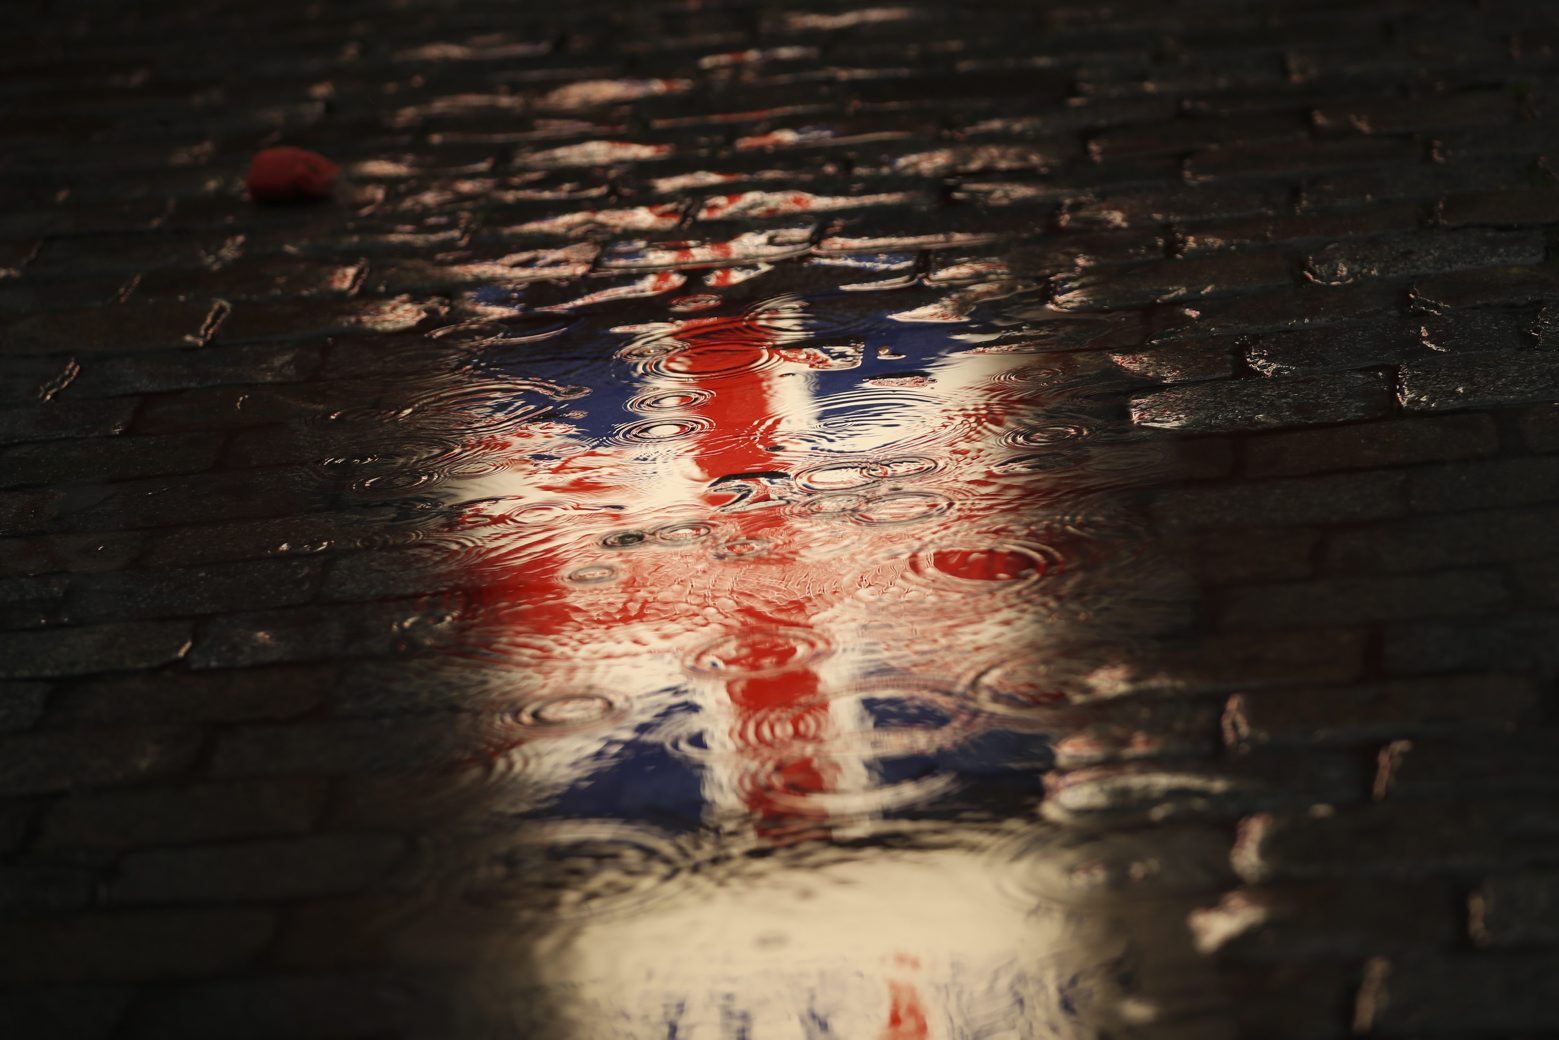 The Union flag is reflected in a puddle during an event called "Brussels calling" to celebrate the friendship between Belgium and Britain at the Grand Place in Brussels, Thursday, Jan. 30, 2020. The European Union grudgingly let go of the United Kingdom with a final vote Wednesday at the EU's parliament that ended the Brexit divorce battle and set the scene for tough trade negotiations in the year ahead. (AP Photo/Francisco Seco) Belgium Britain Brexit